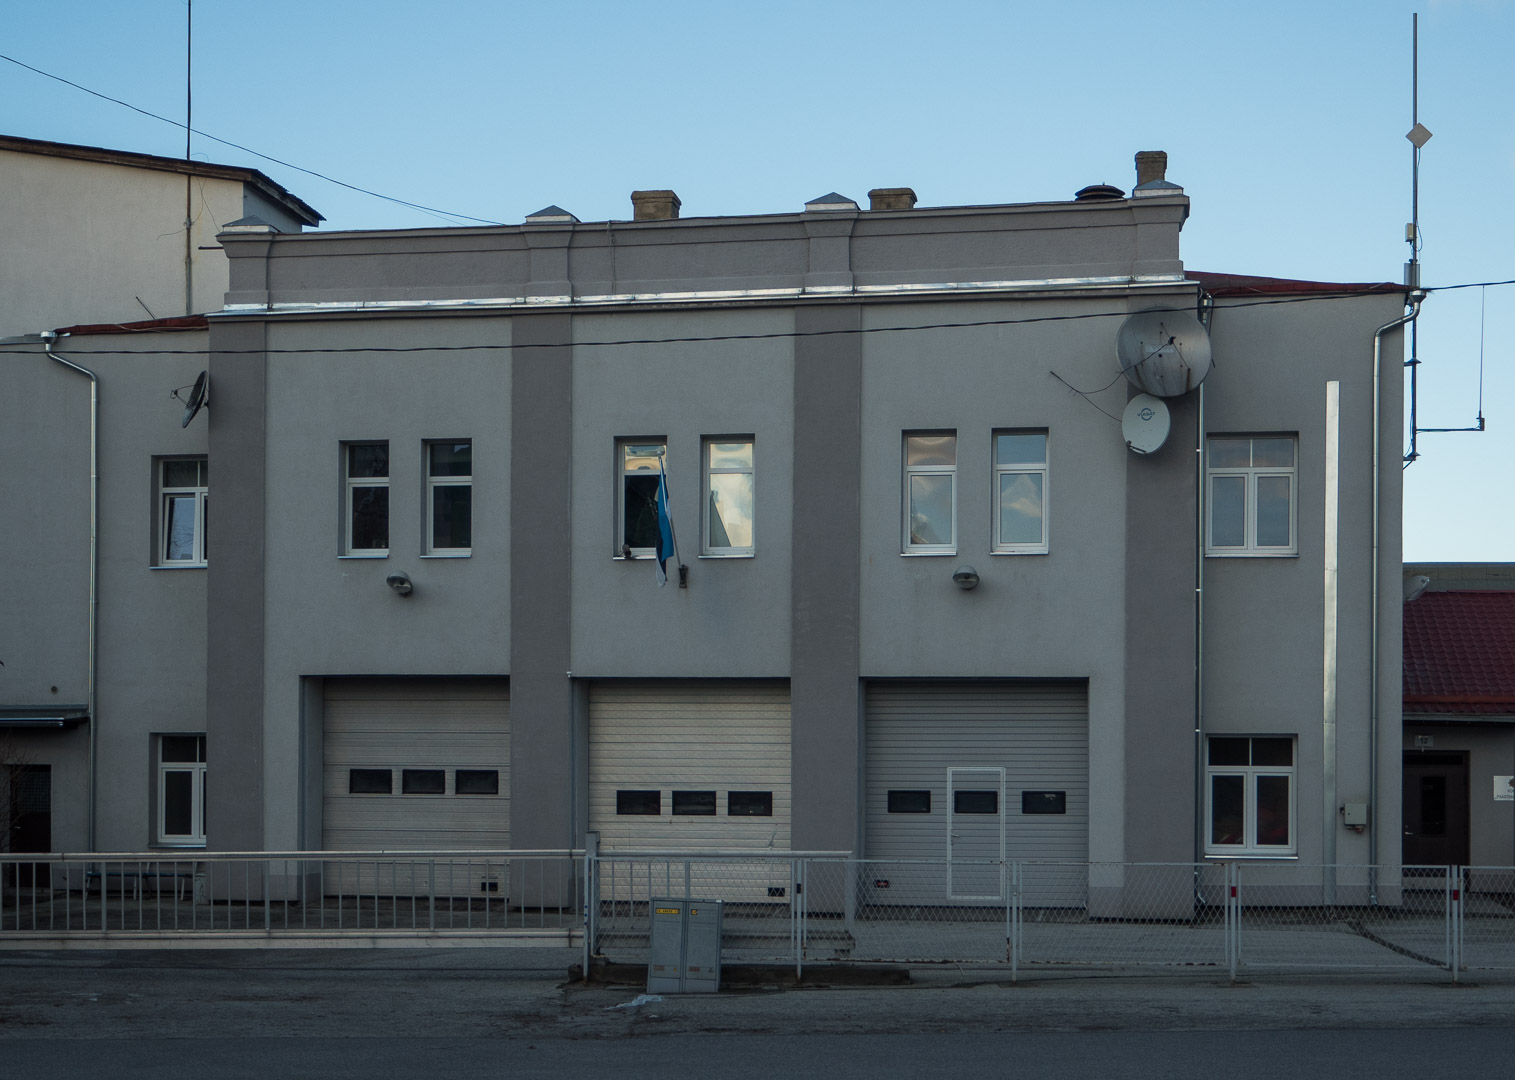 3. Armed Firemando building built on the 30th anniversary of the Soviet fire extinguishment in 1948. rephoto